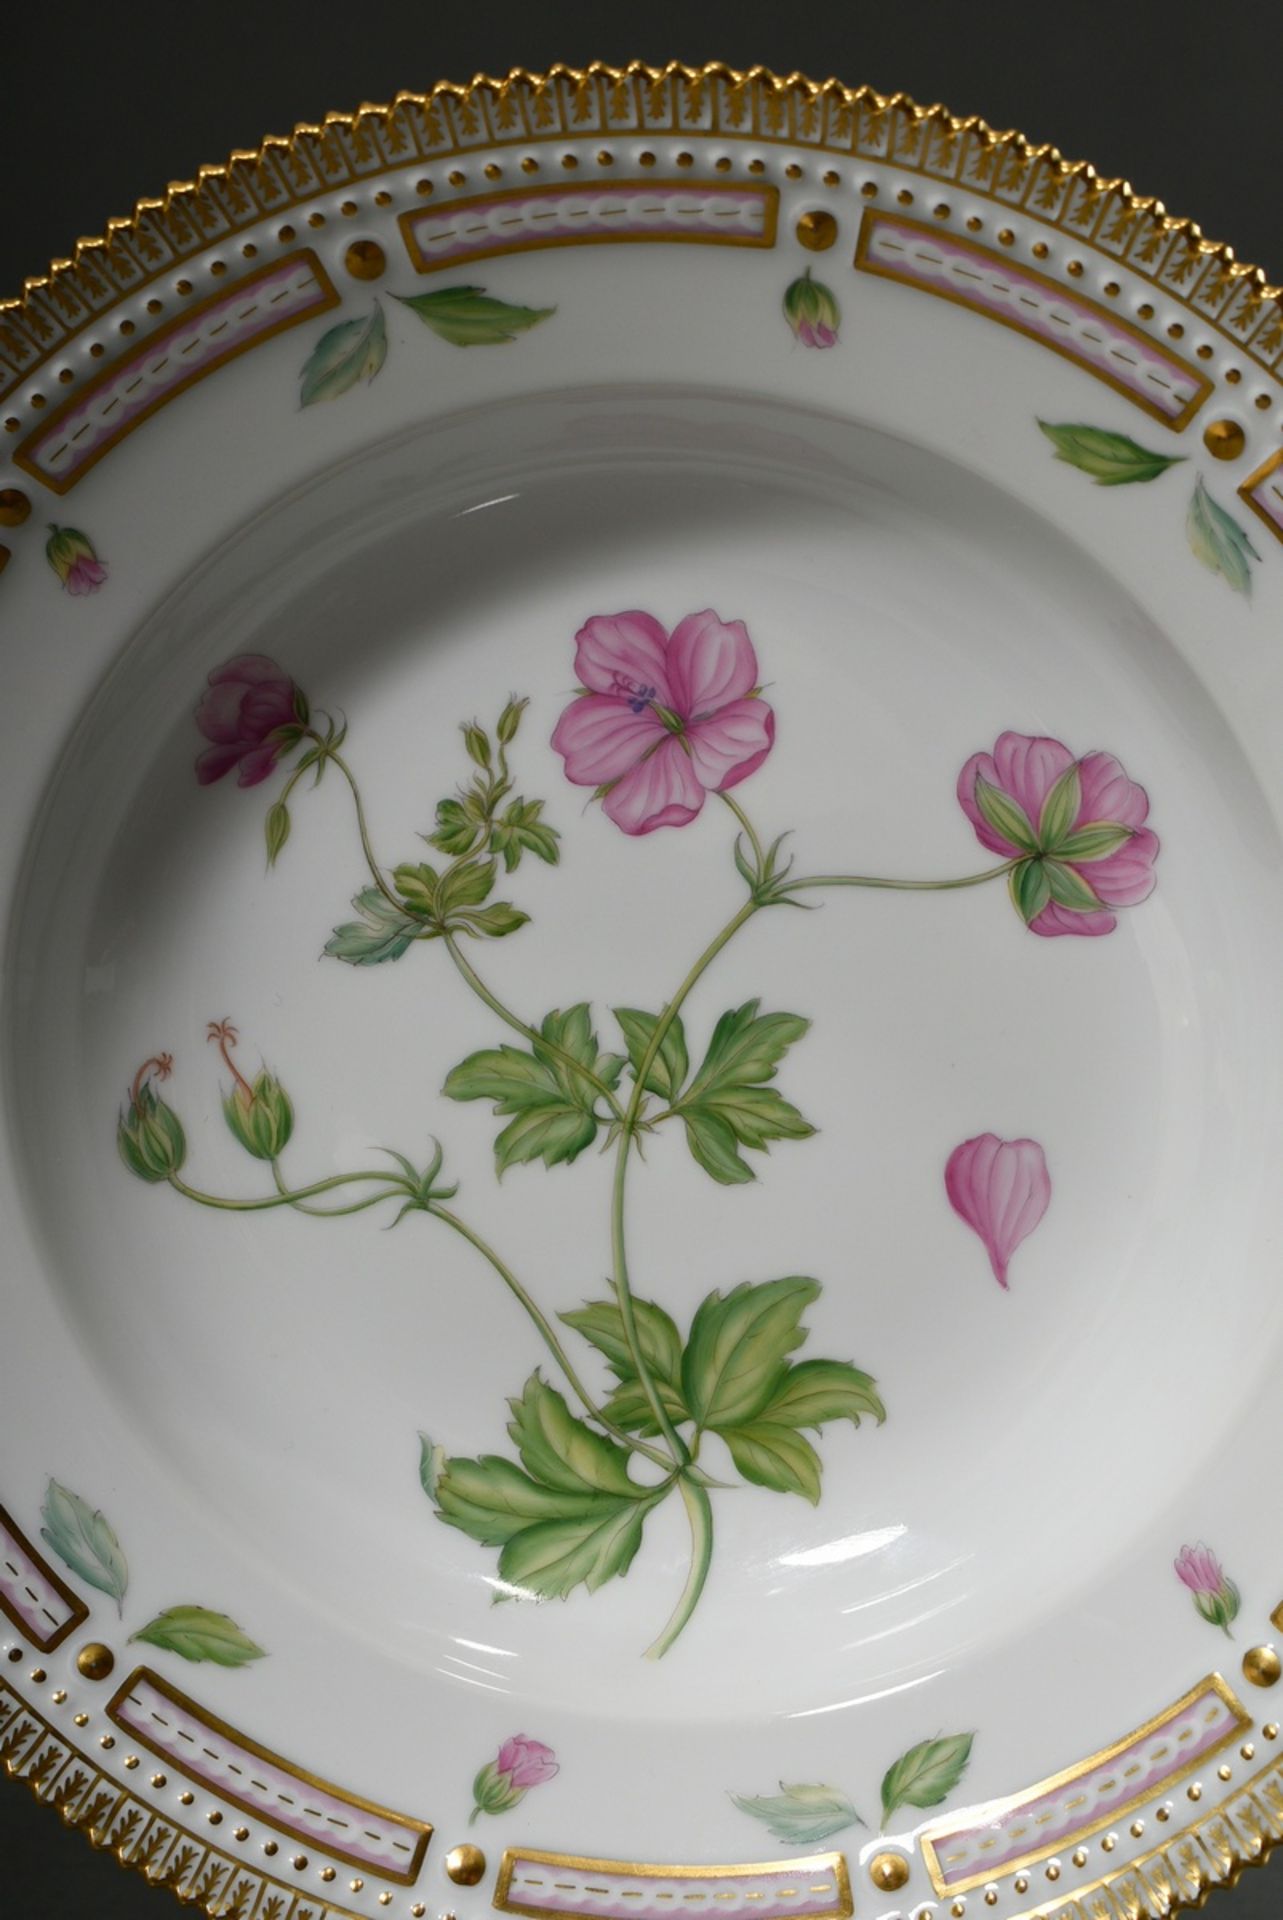 7 Royal Copenhagen "Flora Danica" plate with polychrome painting in the mirror and gold decorated s - Image 8 of 17